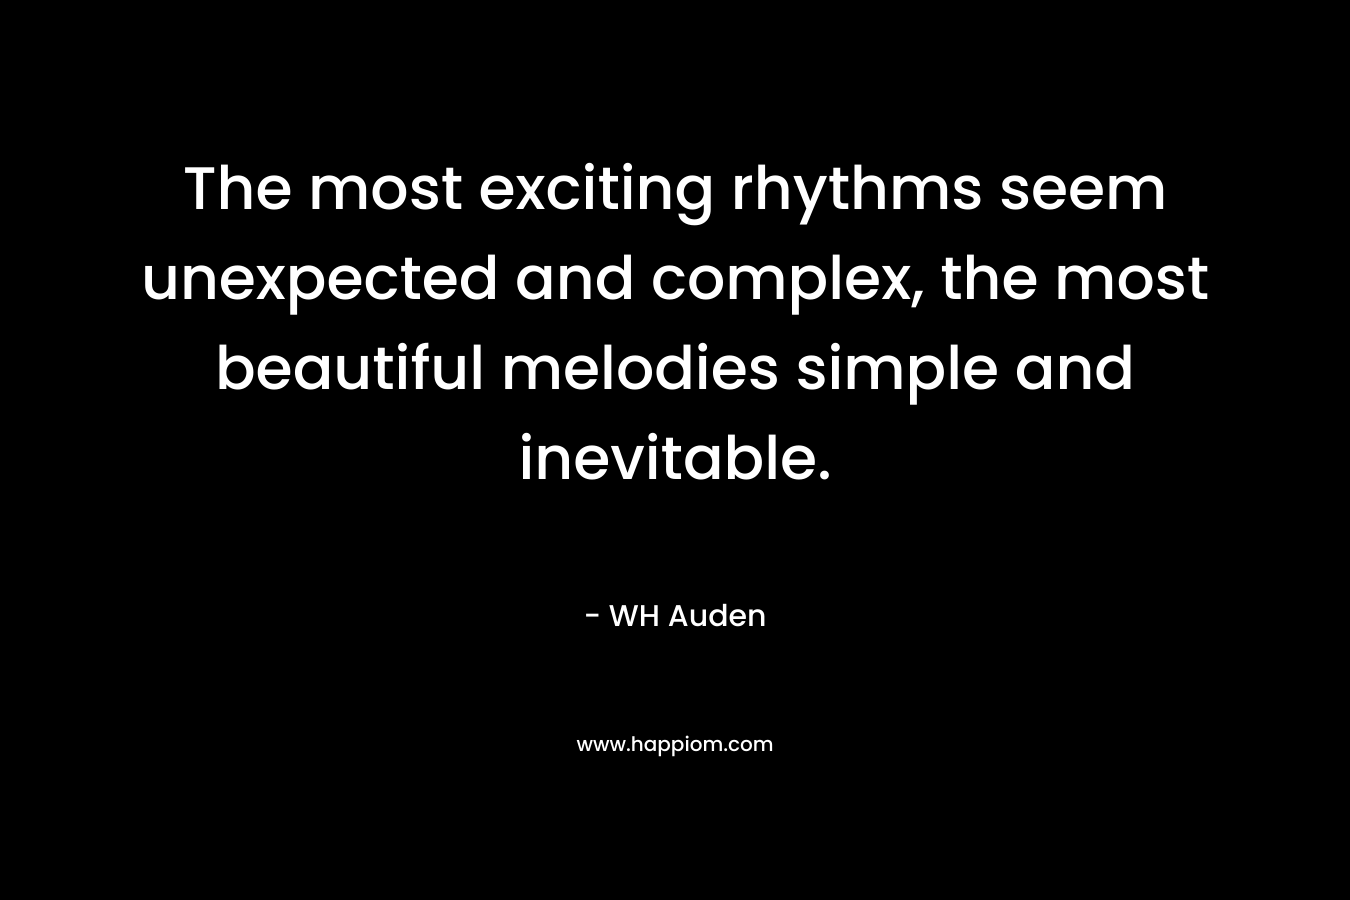 The most exciting rhythms seem unexpected and complex, the most beautiful melodies simple and inevitable. – WH Auden